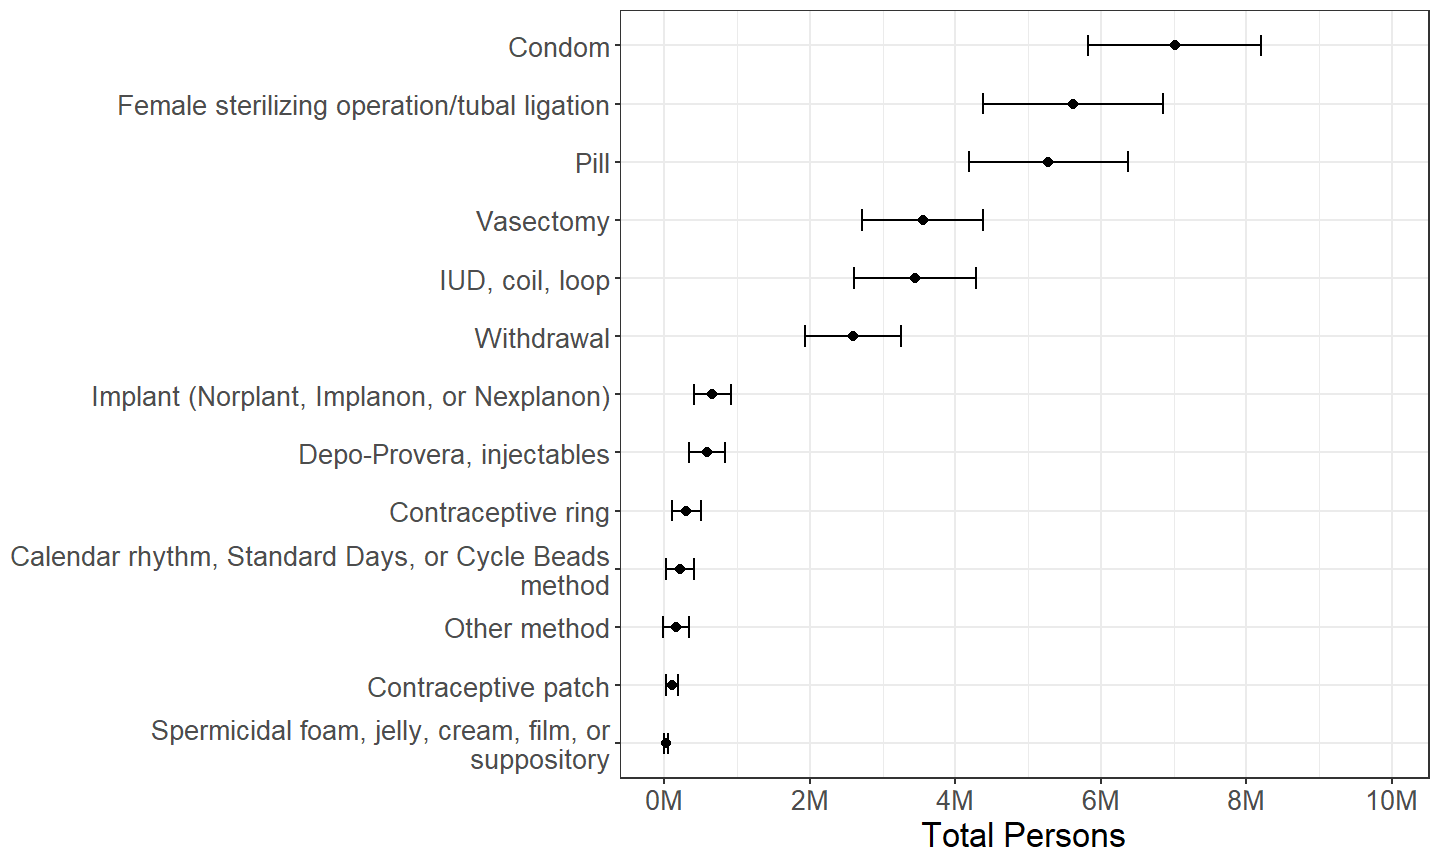 Males categorized by which contraceptive method was used during last intercourse with a female in the past 3 months, among those who used exactly one method during last intercourse.